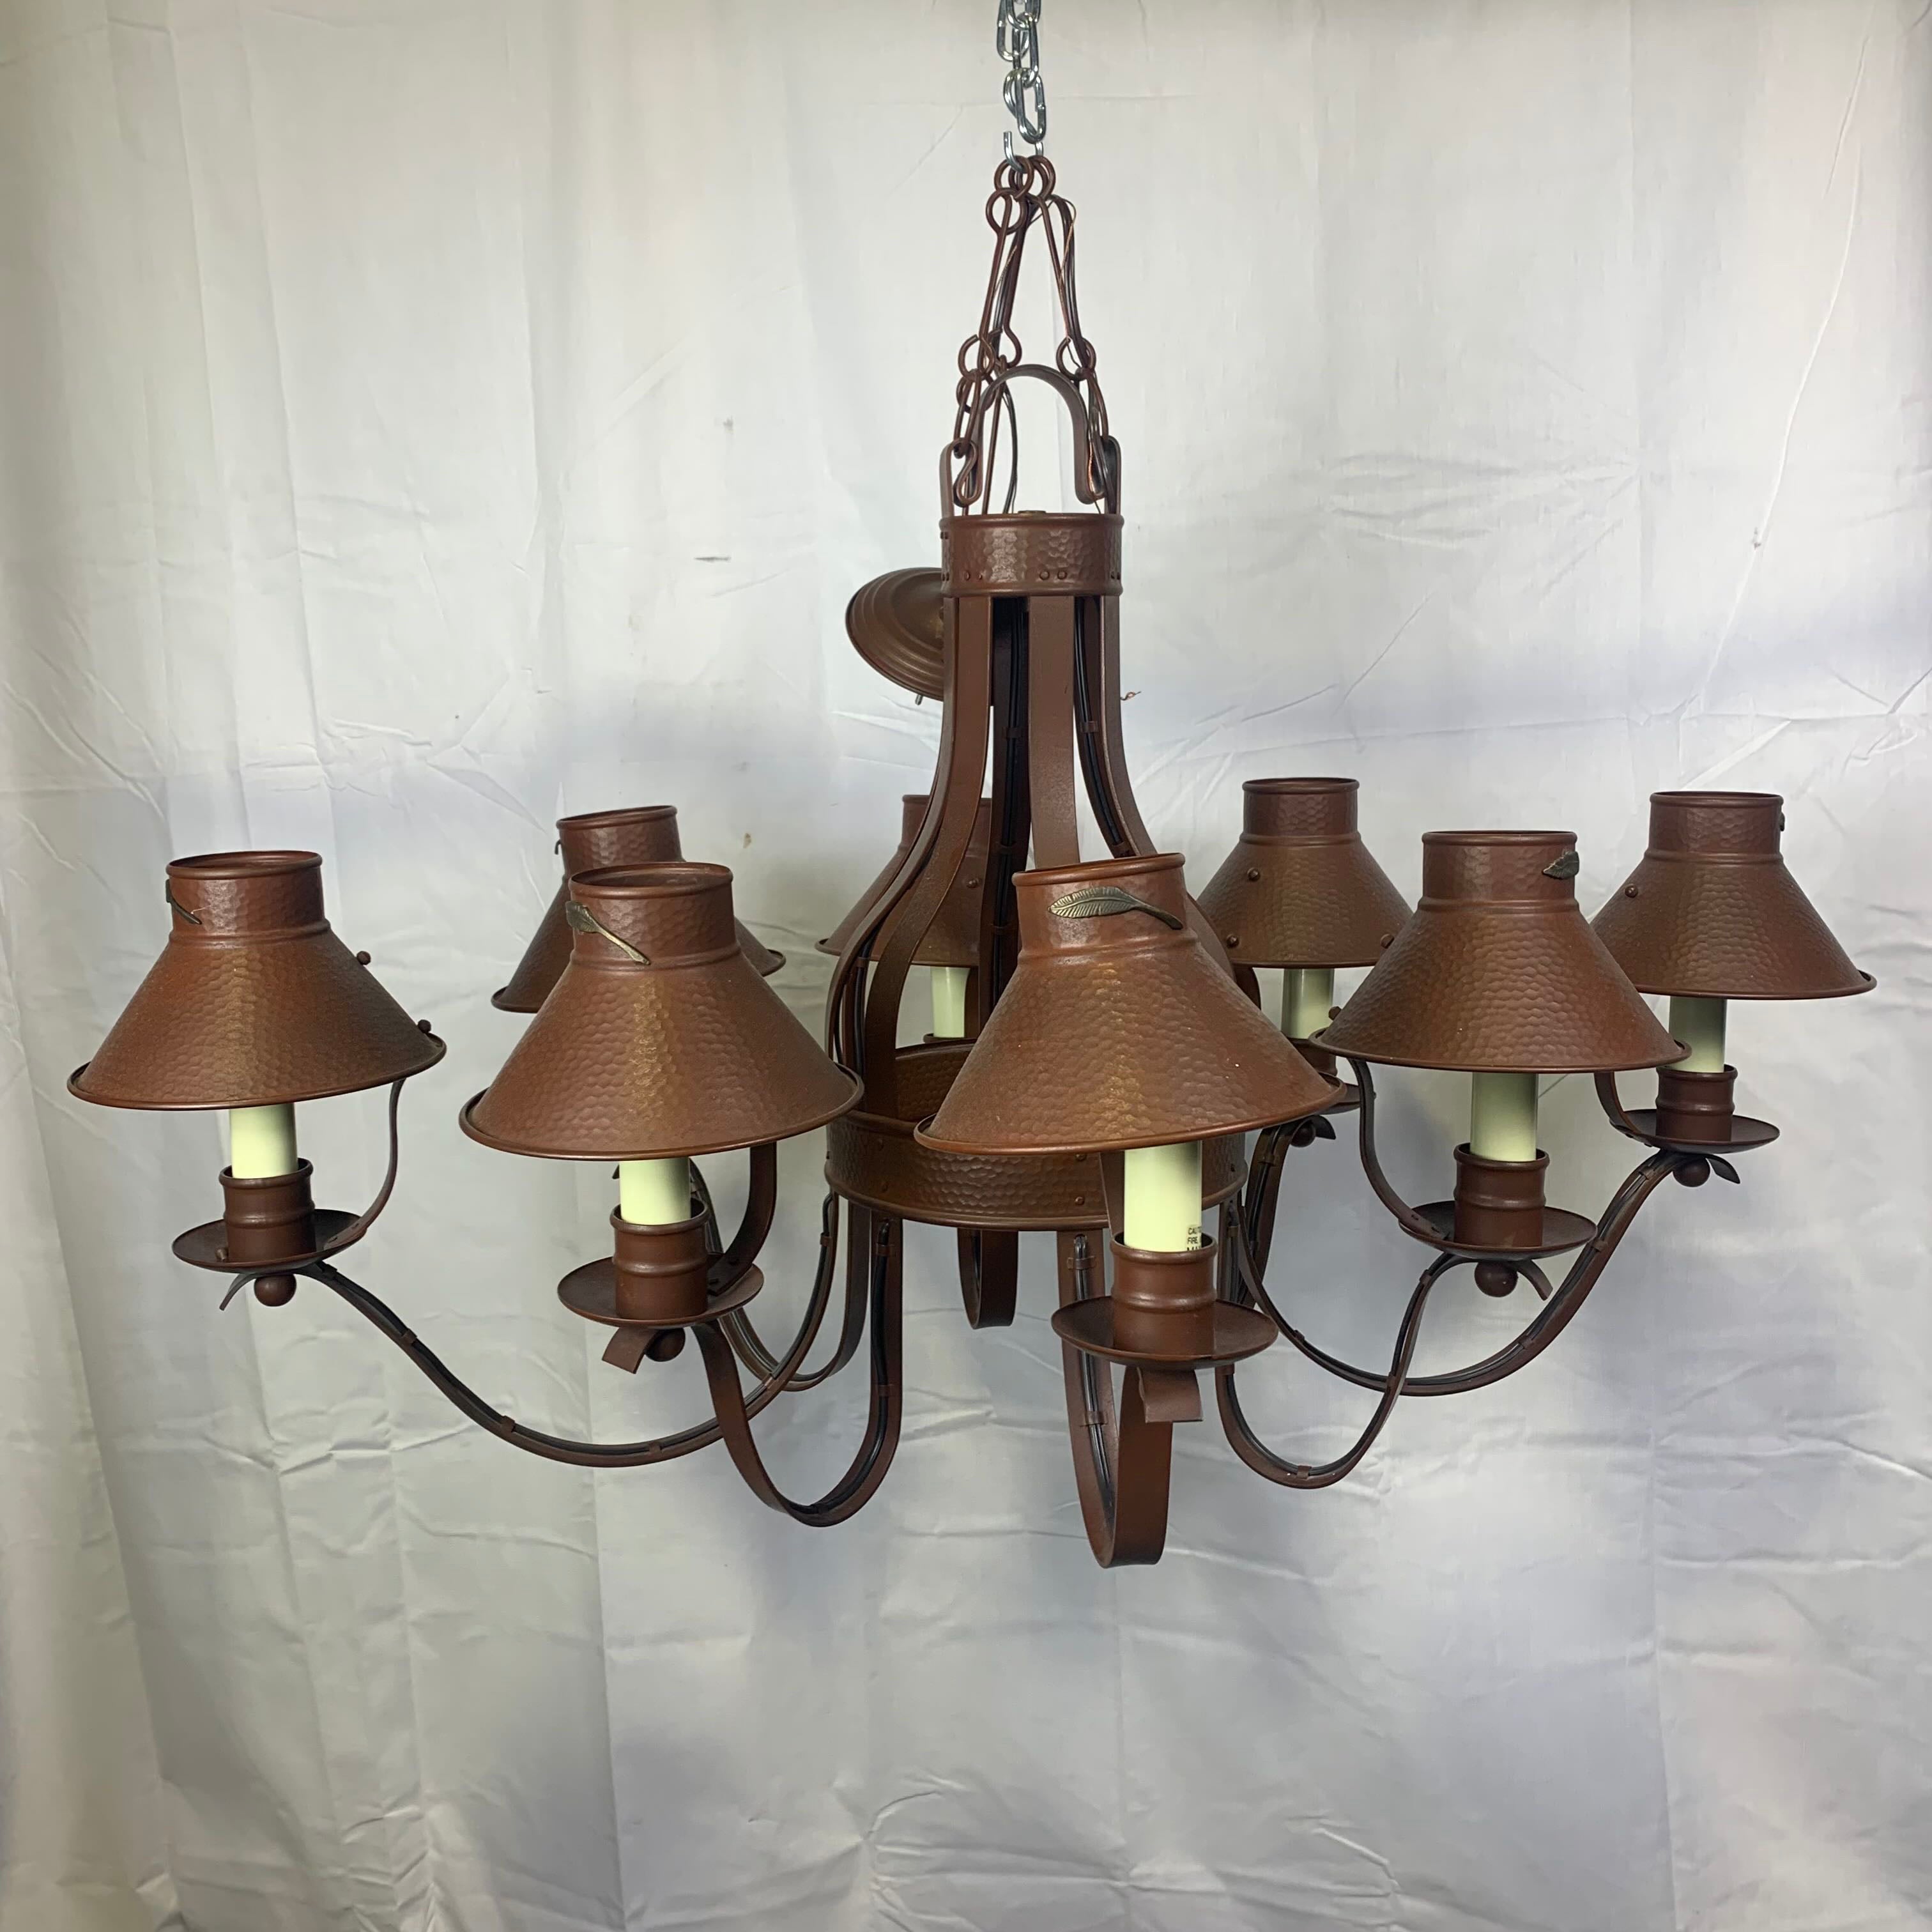 42"x 30"x 25" Lodge Style Hammered Metal Shades with Leaf Detail 8 Light Chandelier